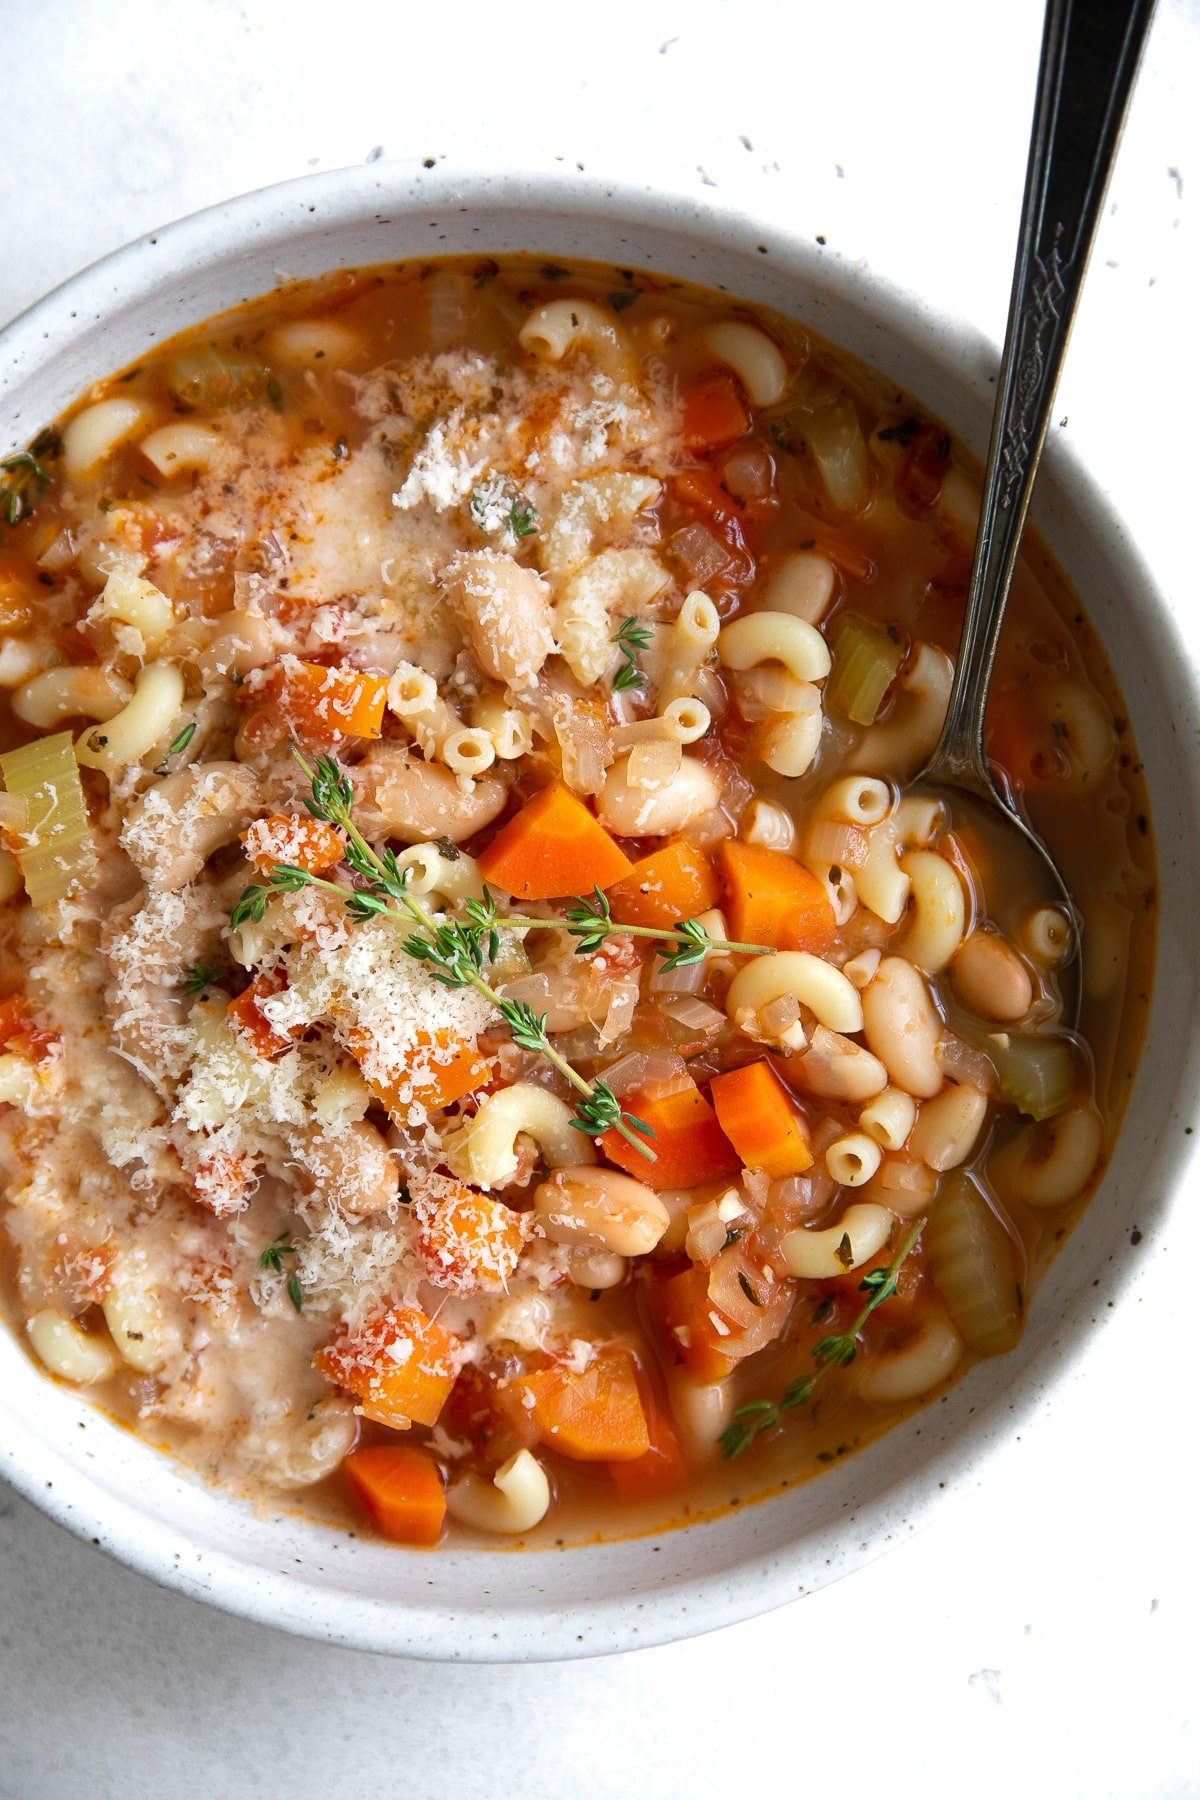 Top down image of a white shallow bowl filled with macaroni pasta, white beans, tomatoes, vegetables, in a light broth.